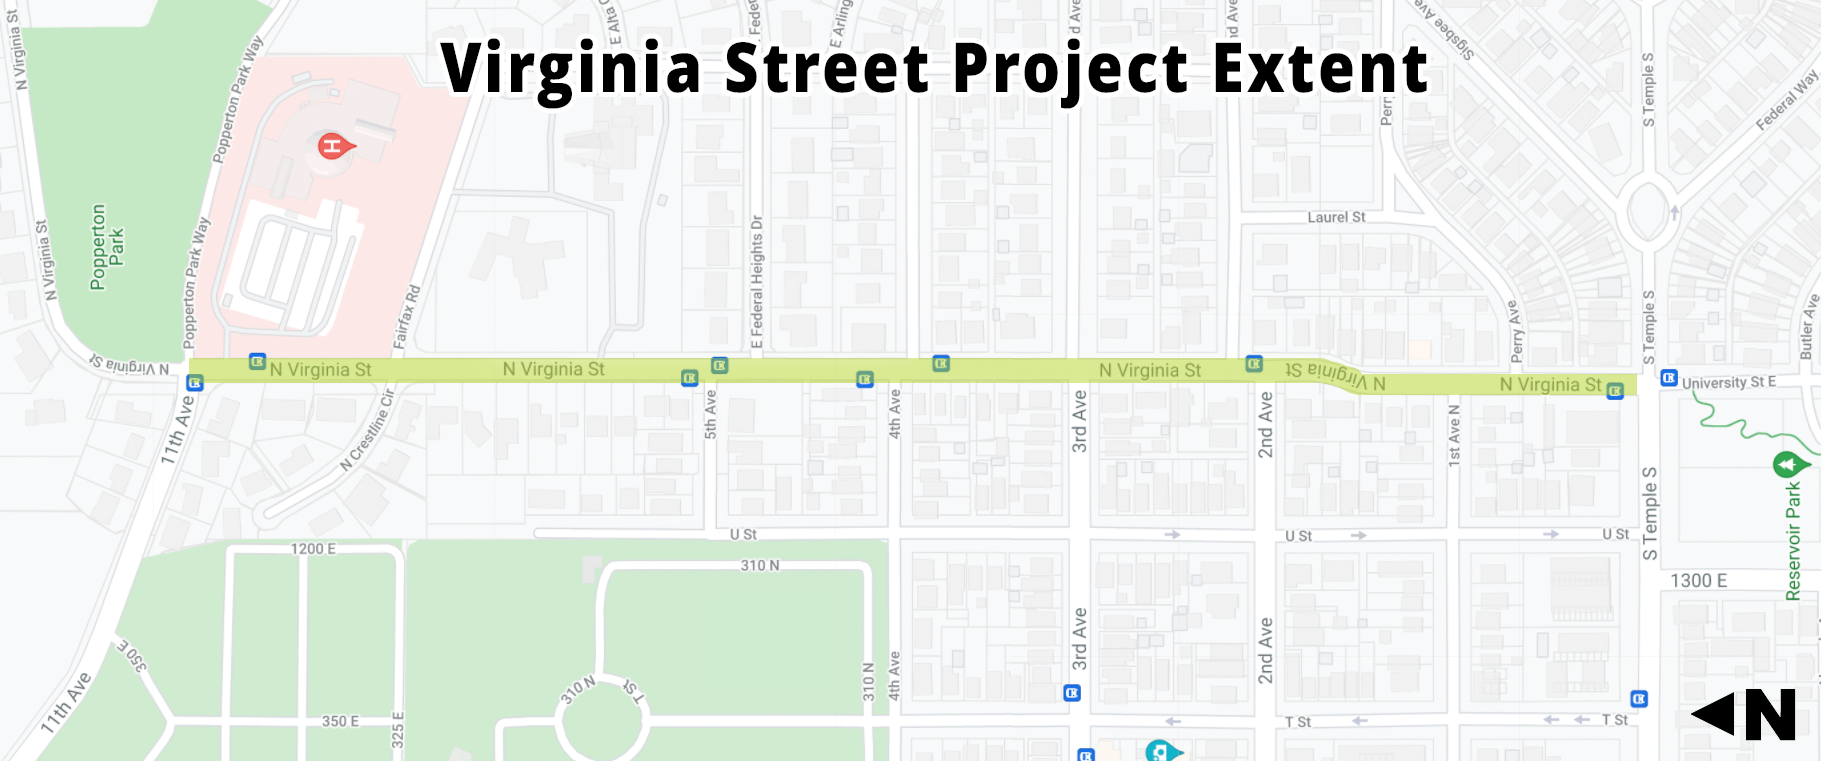 Map of the Virginia Street Project Extent, which runs the length of Virginia Street from 11th Avenue to South Temple.